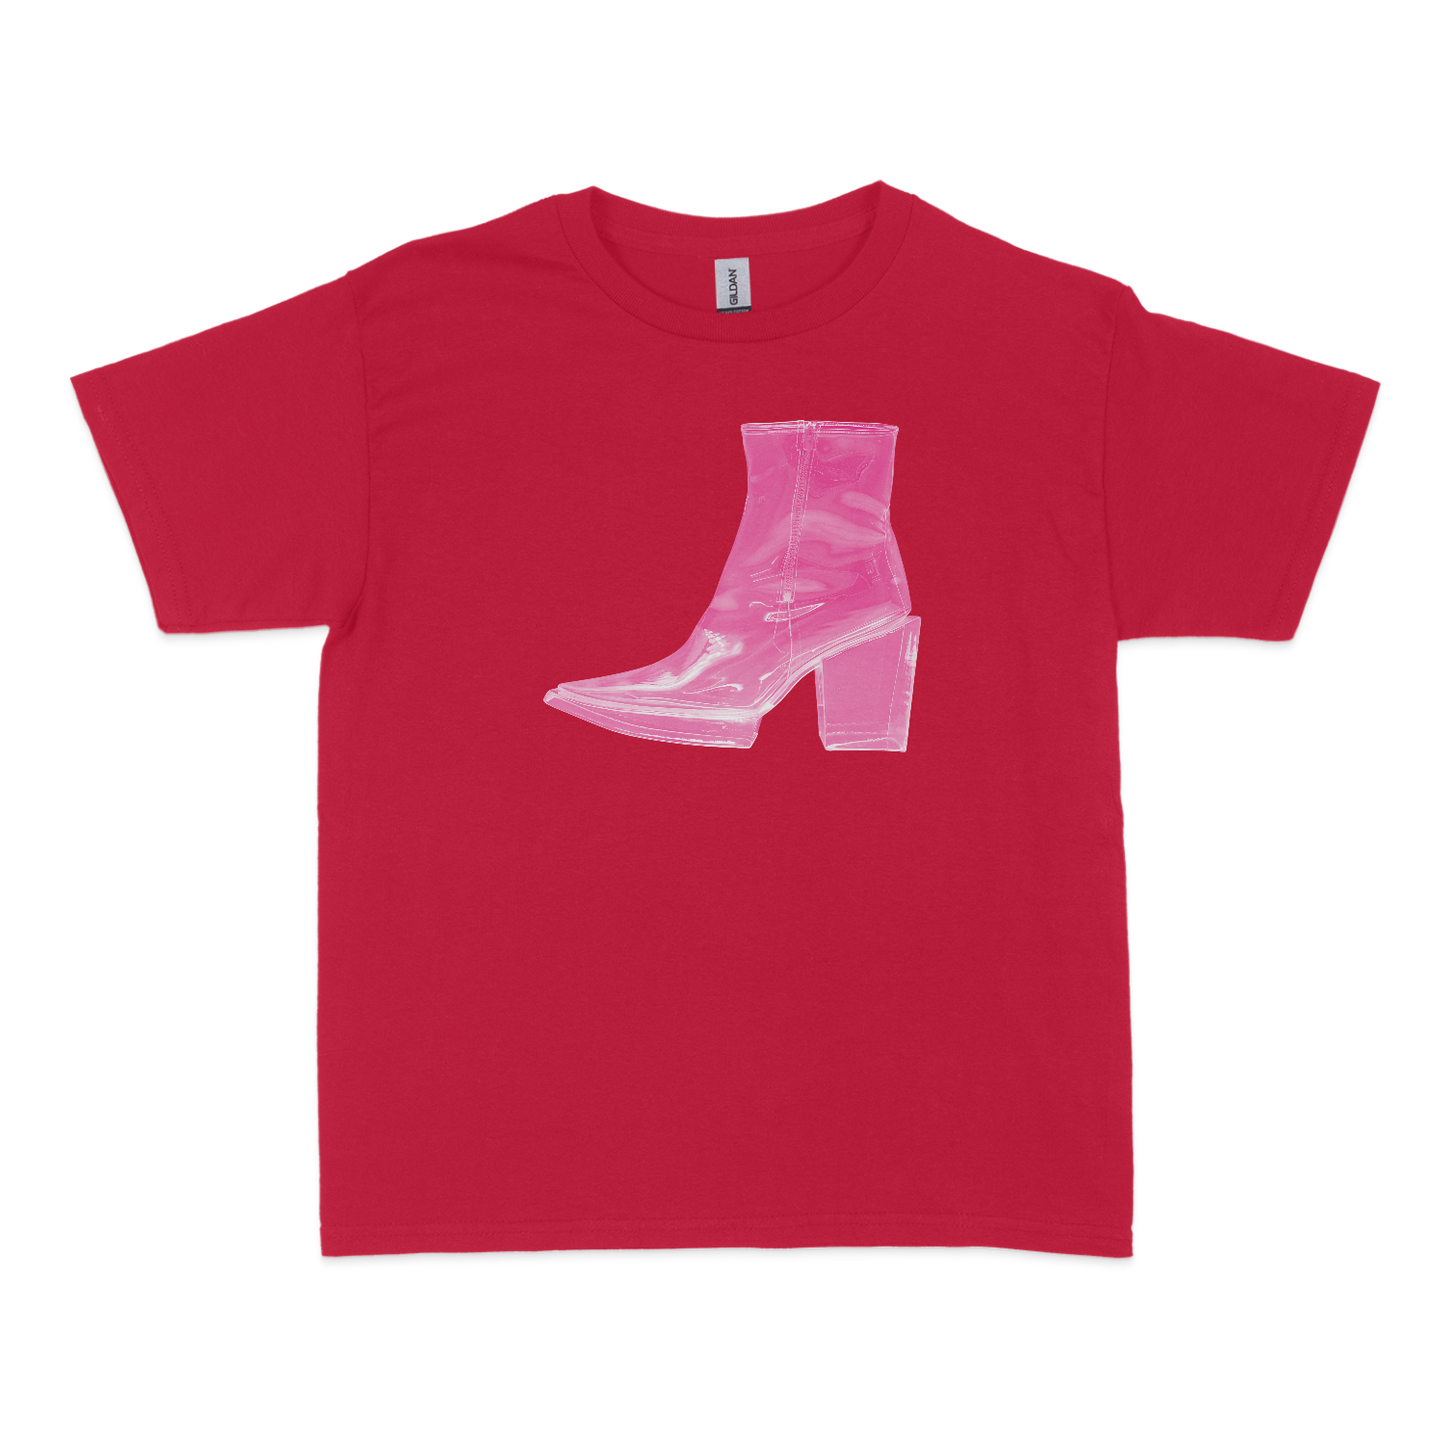 Pink Glossy Boot Baby Tee